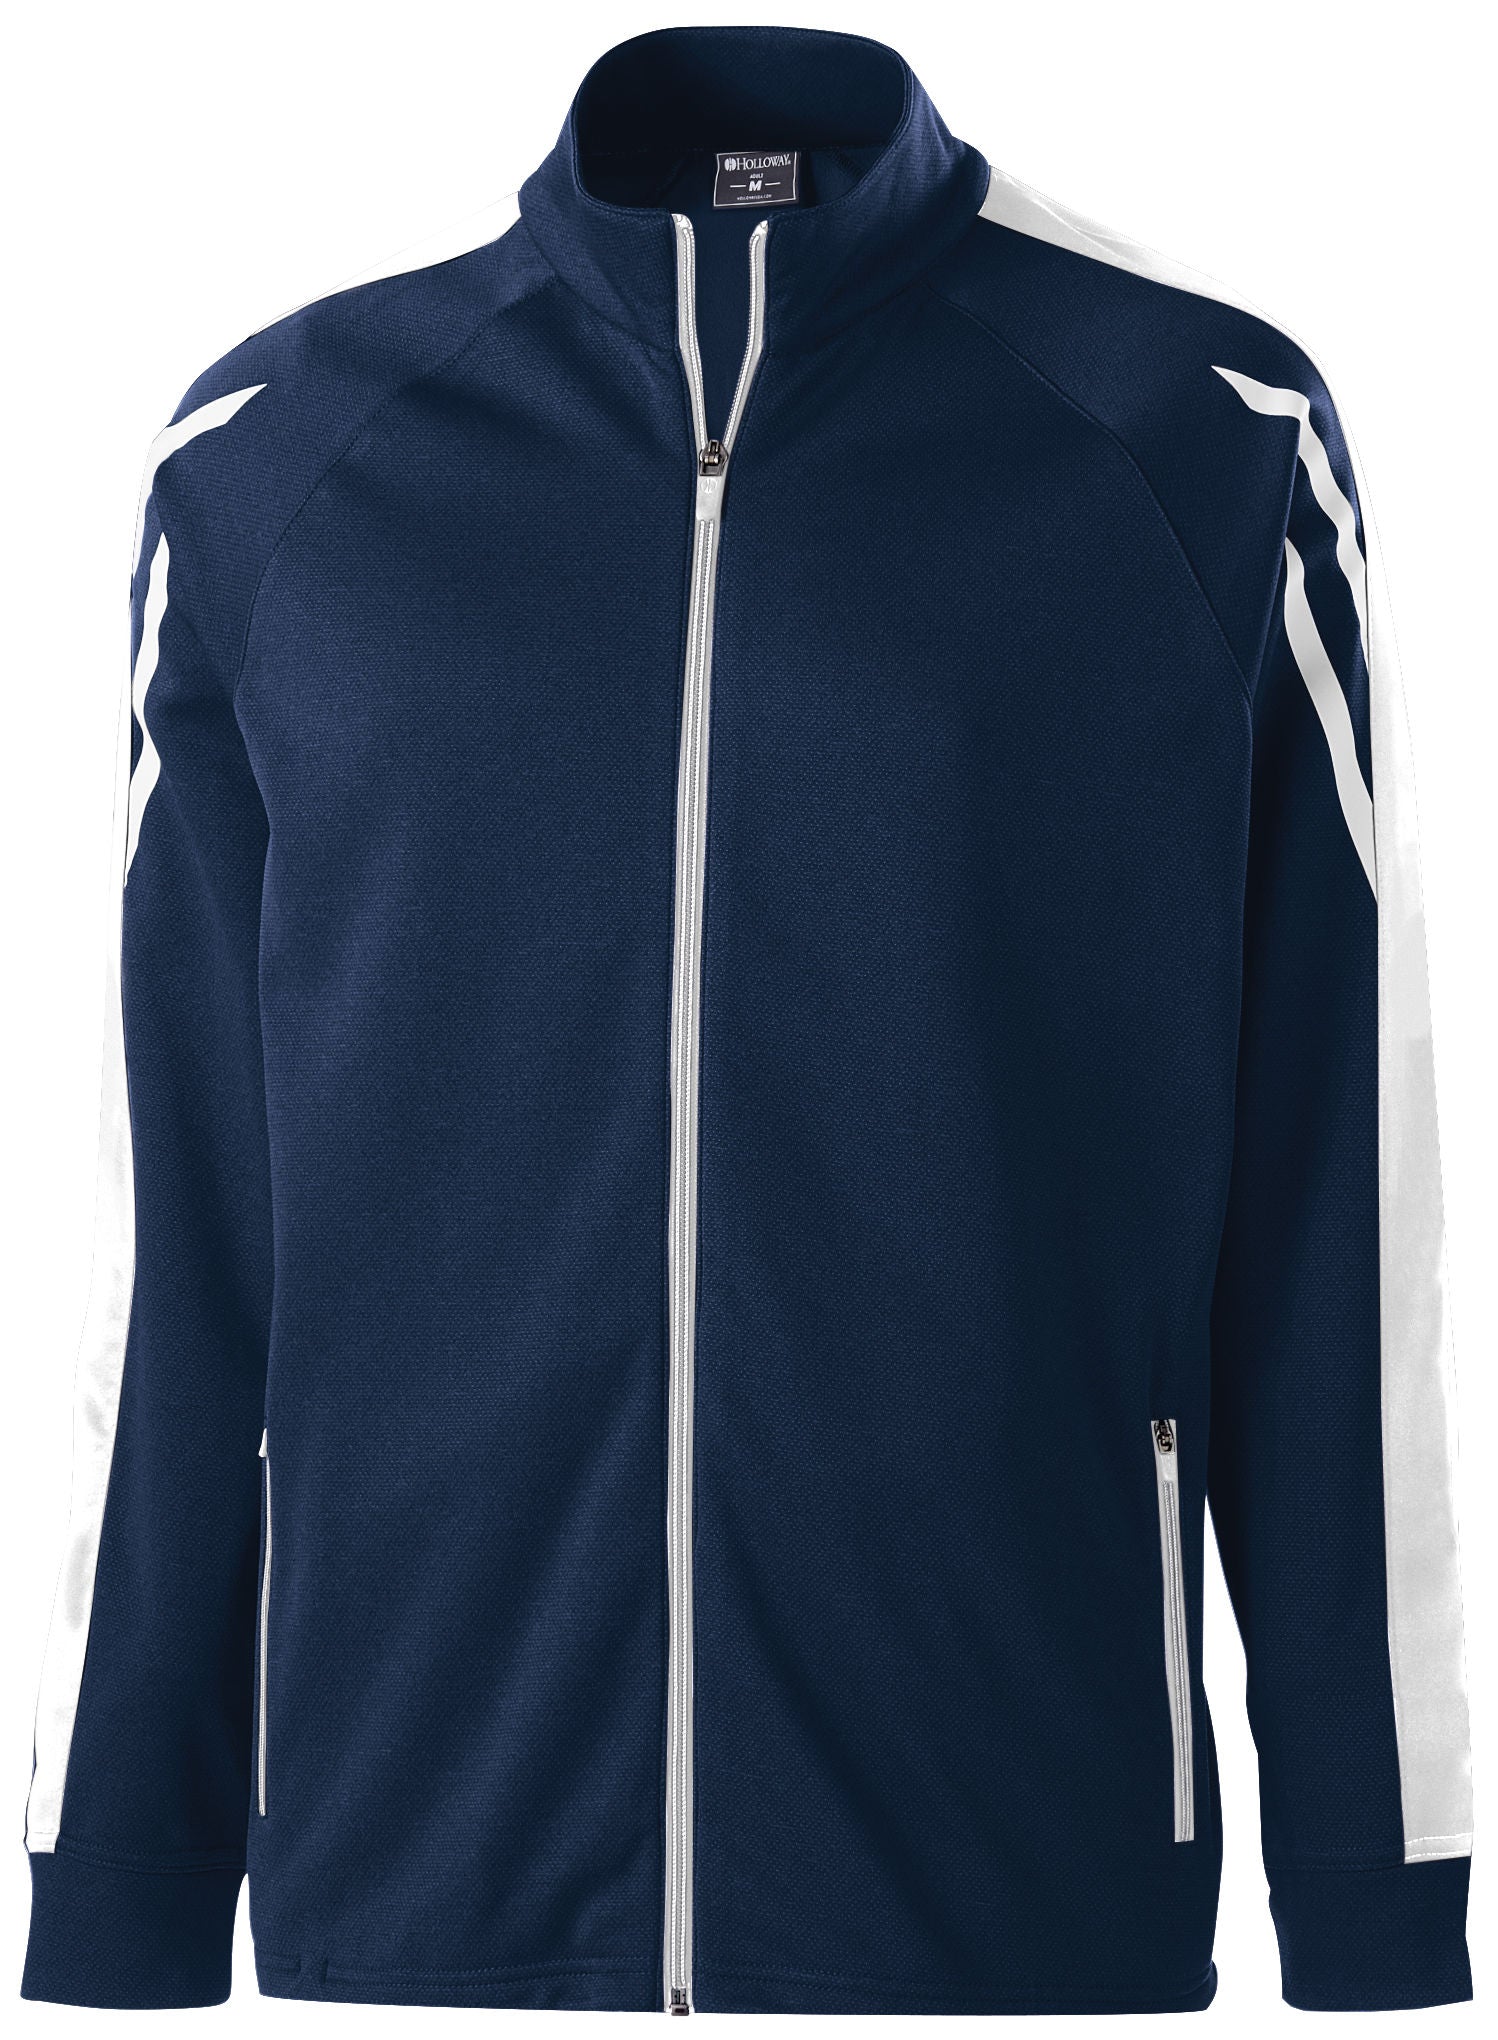 Holloway Flux Jacket in Navy Heather/White/White  -Part of the Adult, Adult-Jacket, Holloway, Outerwear, Flux-Collection, Corporate-Collection product lines at KanaleyCreations.com